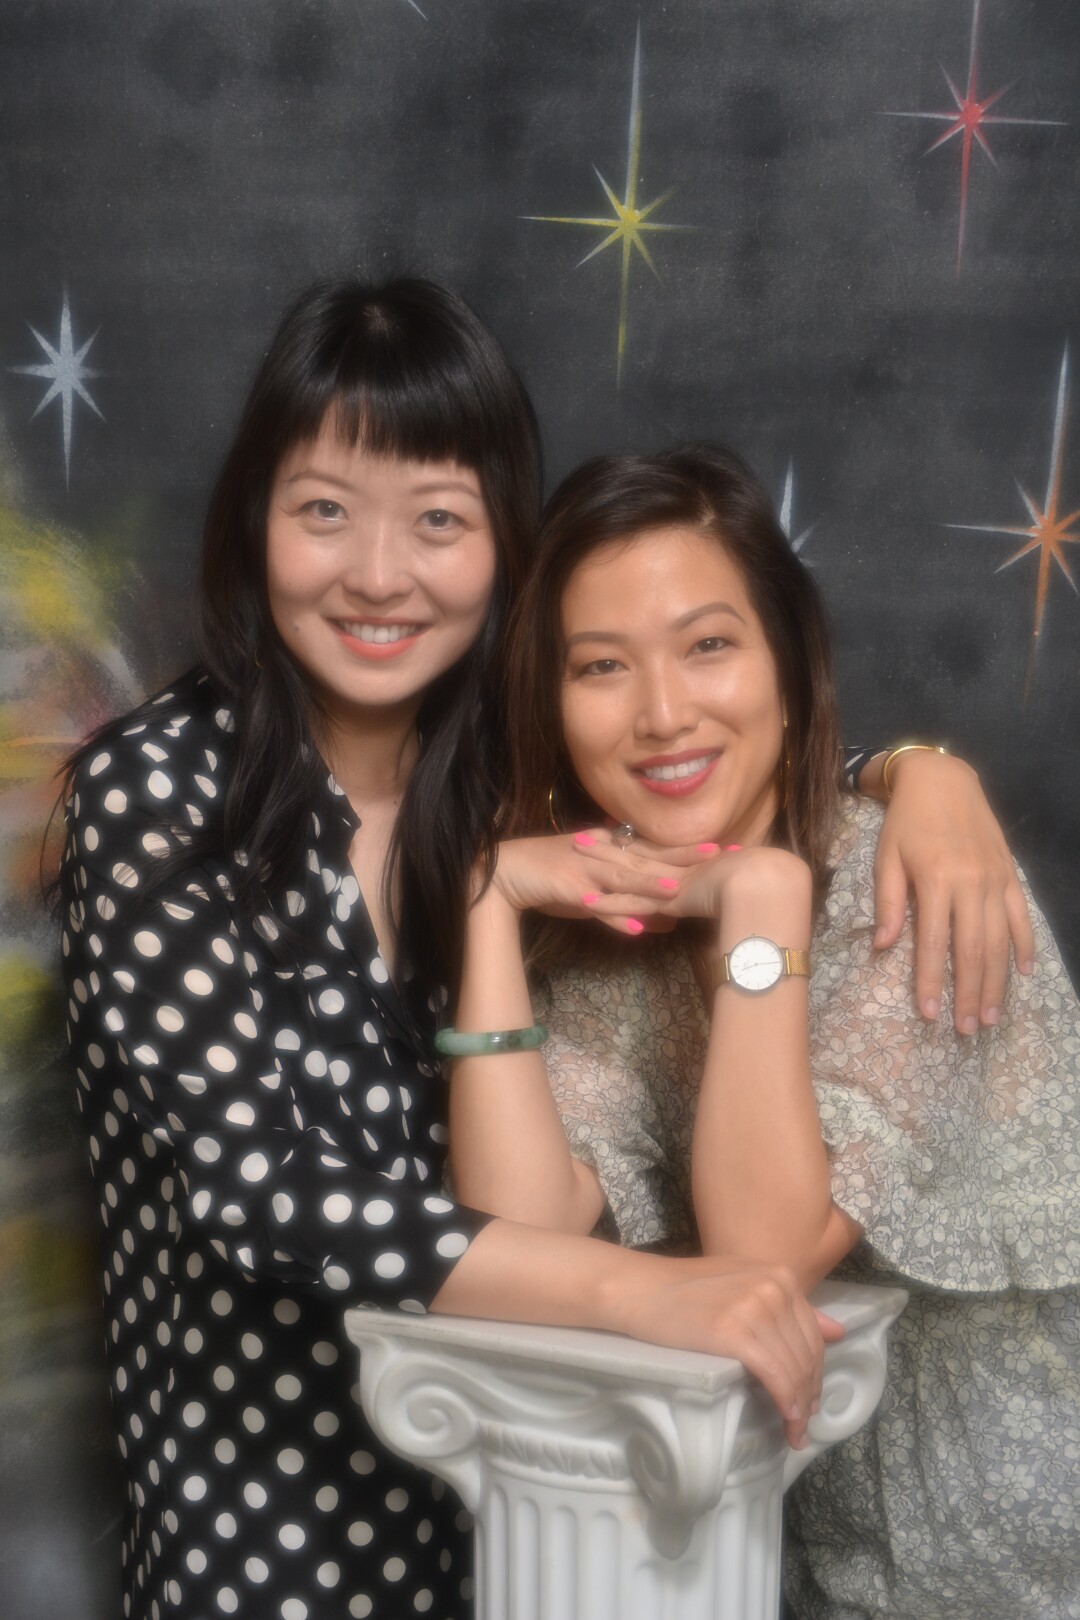 Xuan Juliana Wang (left) is an L.A. based writer and author of “Home Remedies.” and Jean Chen Ho is an L.A.-based writer